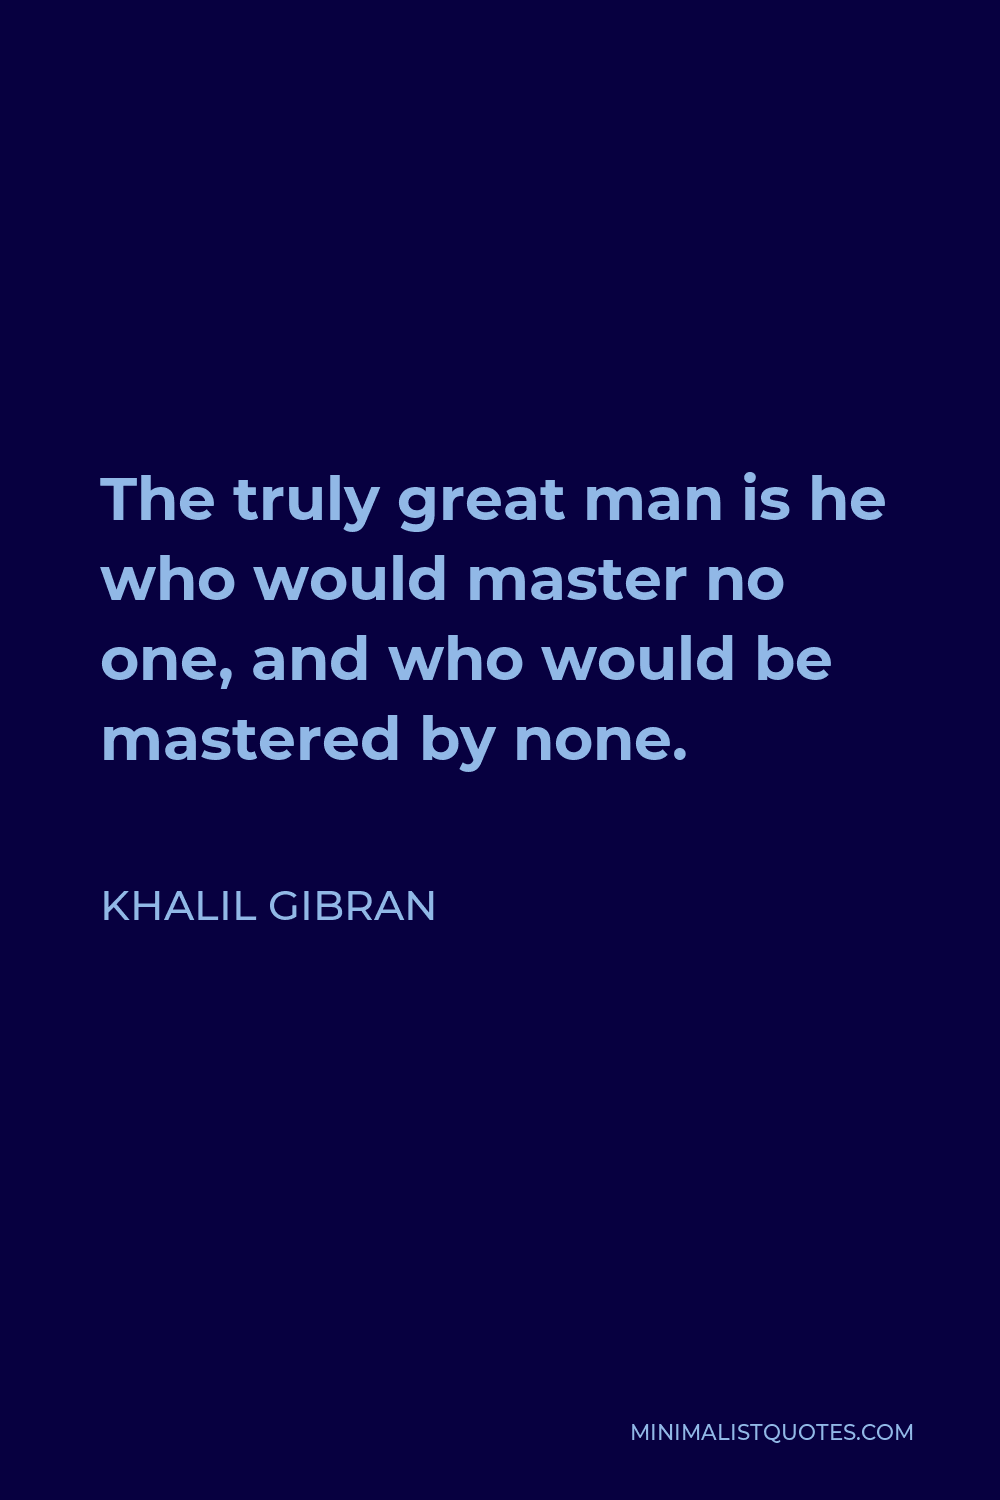 Khalil Gibran Quote - The truly great man is he who would master no one, and who would be mastered by none.